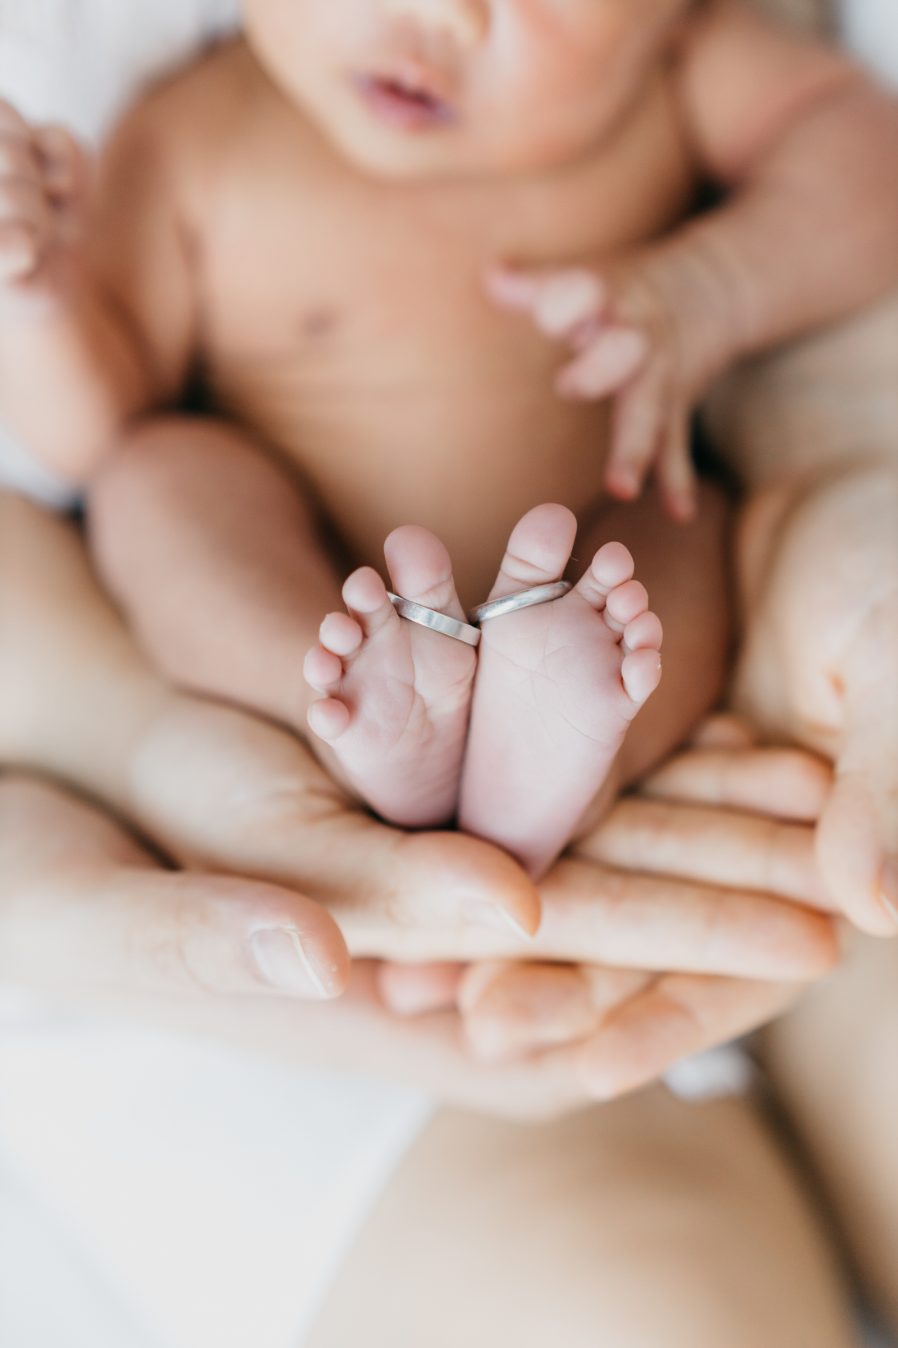 Newborn photography Kuala Lumpur baby feet with wedding rings on parents hands